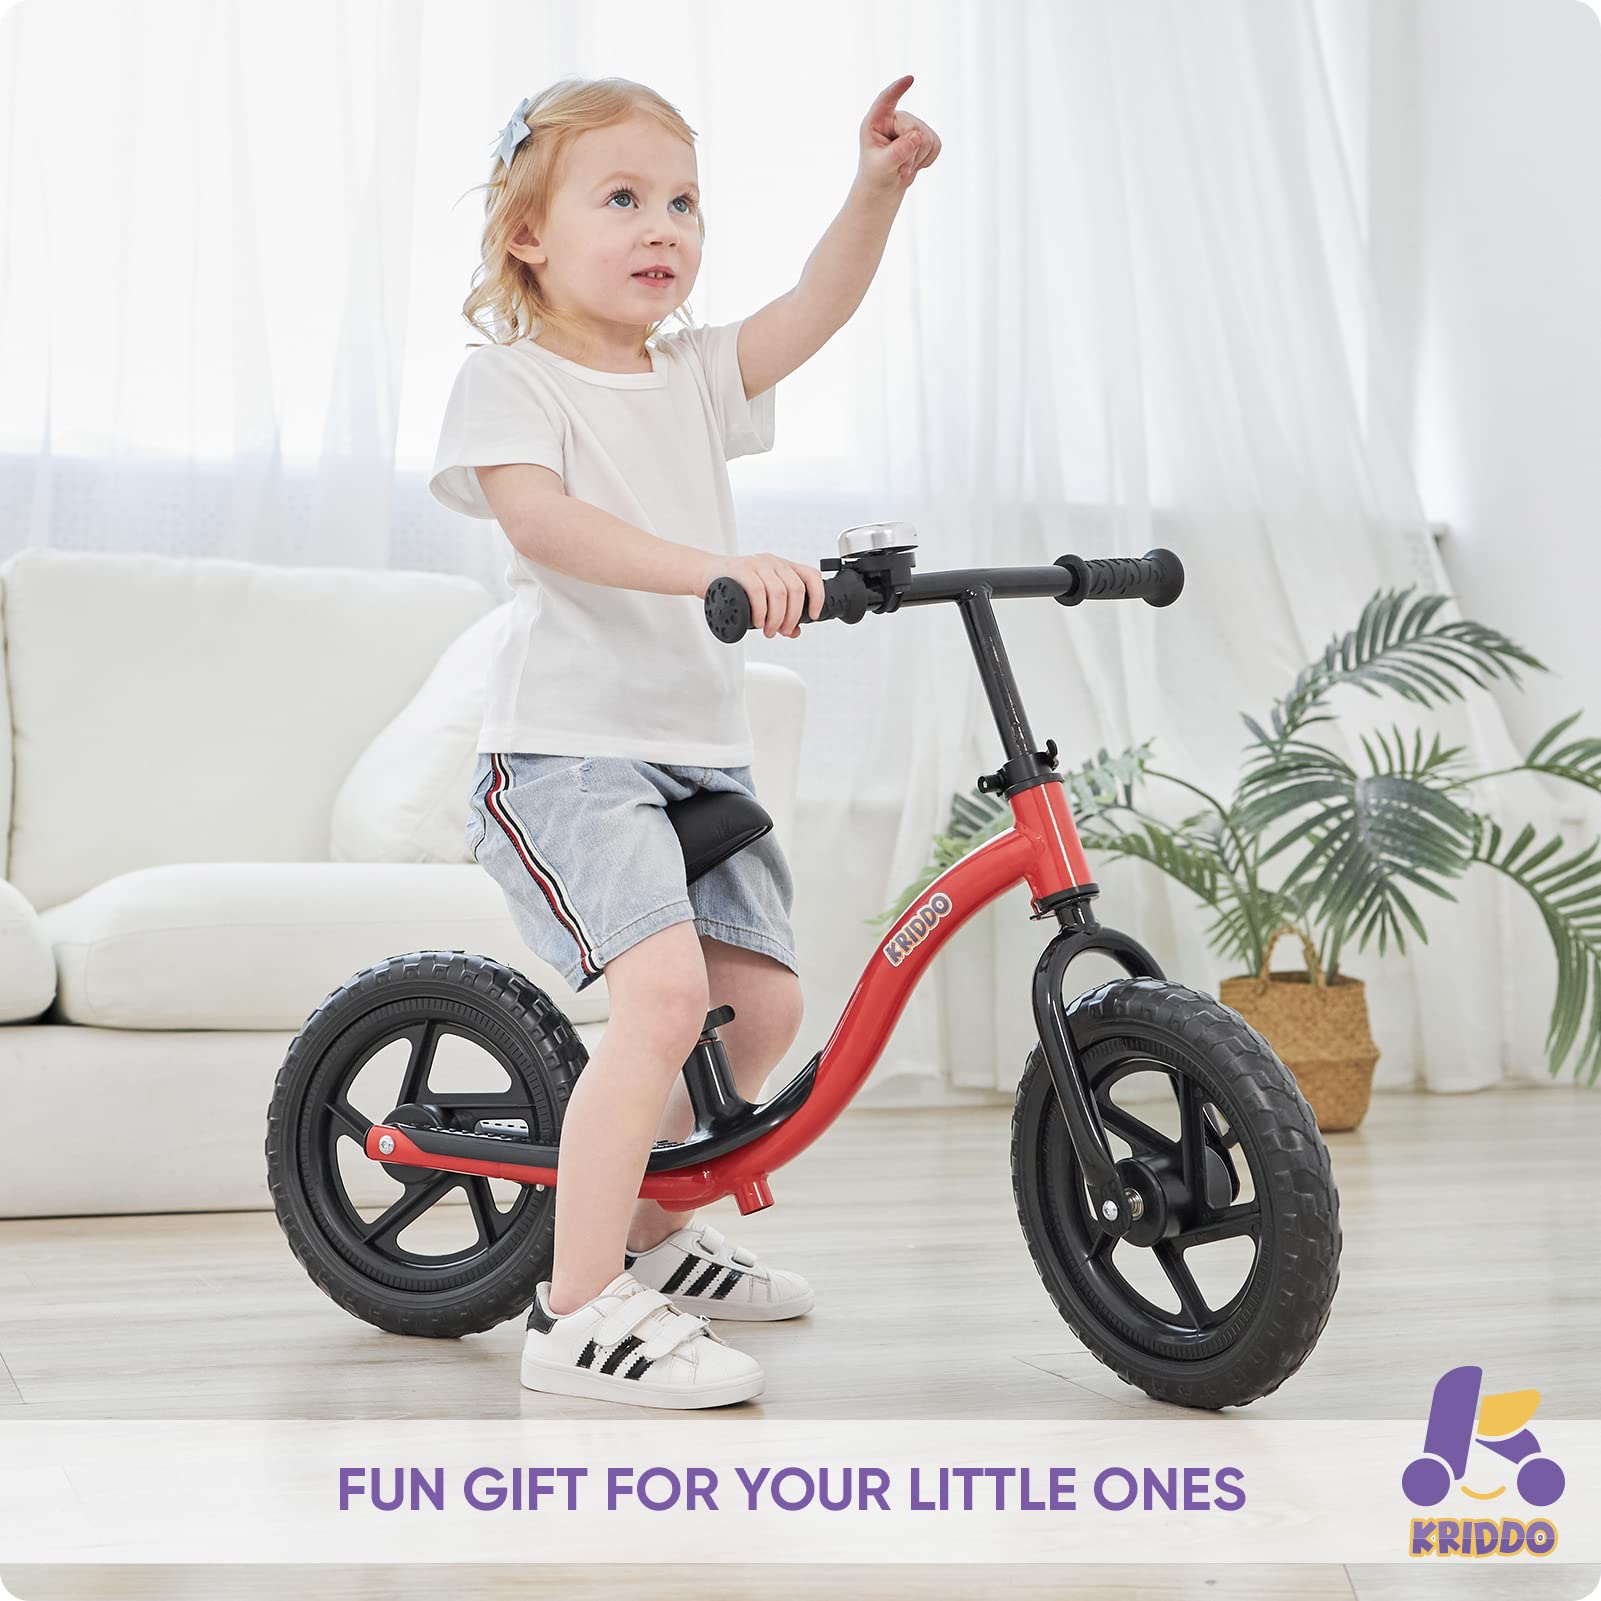 KRIDDO Toddler Balance Bike 2 Year Old, Age 18 Months to 5 Years Old, Early Learning Interactive Push Bicycle with Steady Balancing and Footrest, Gift for 2-5 Boys Girls, Red